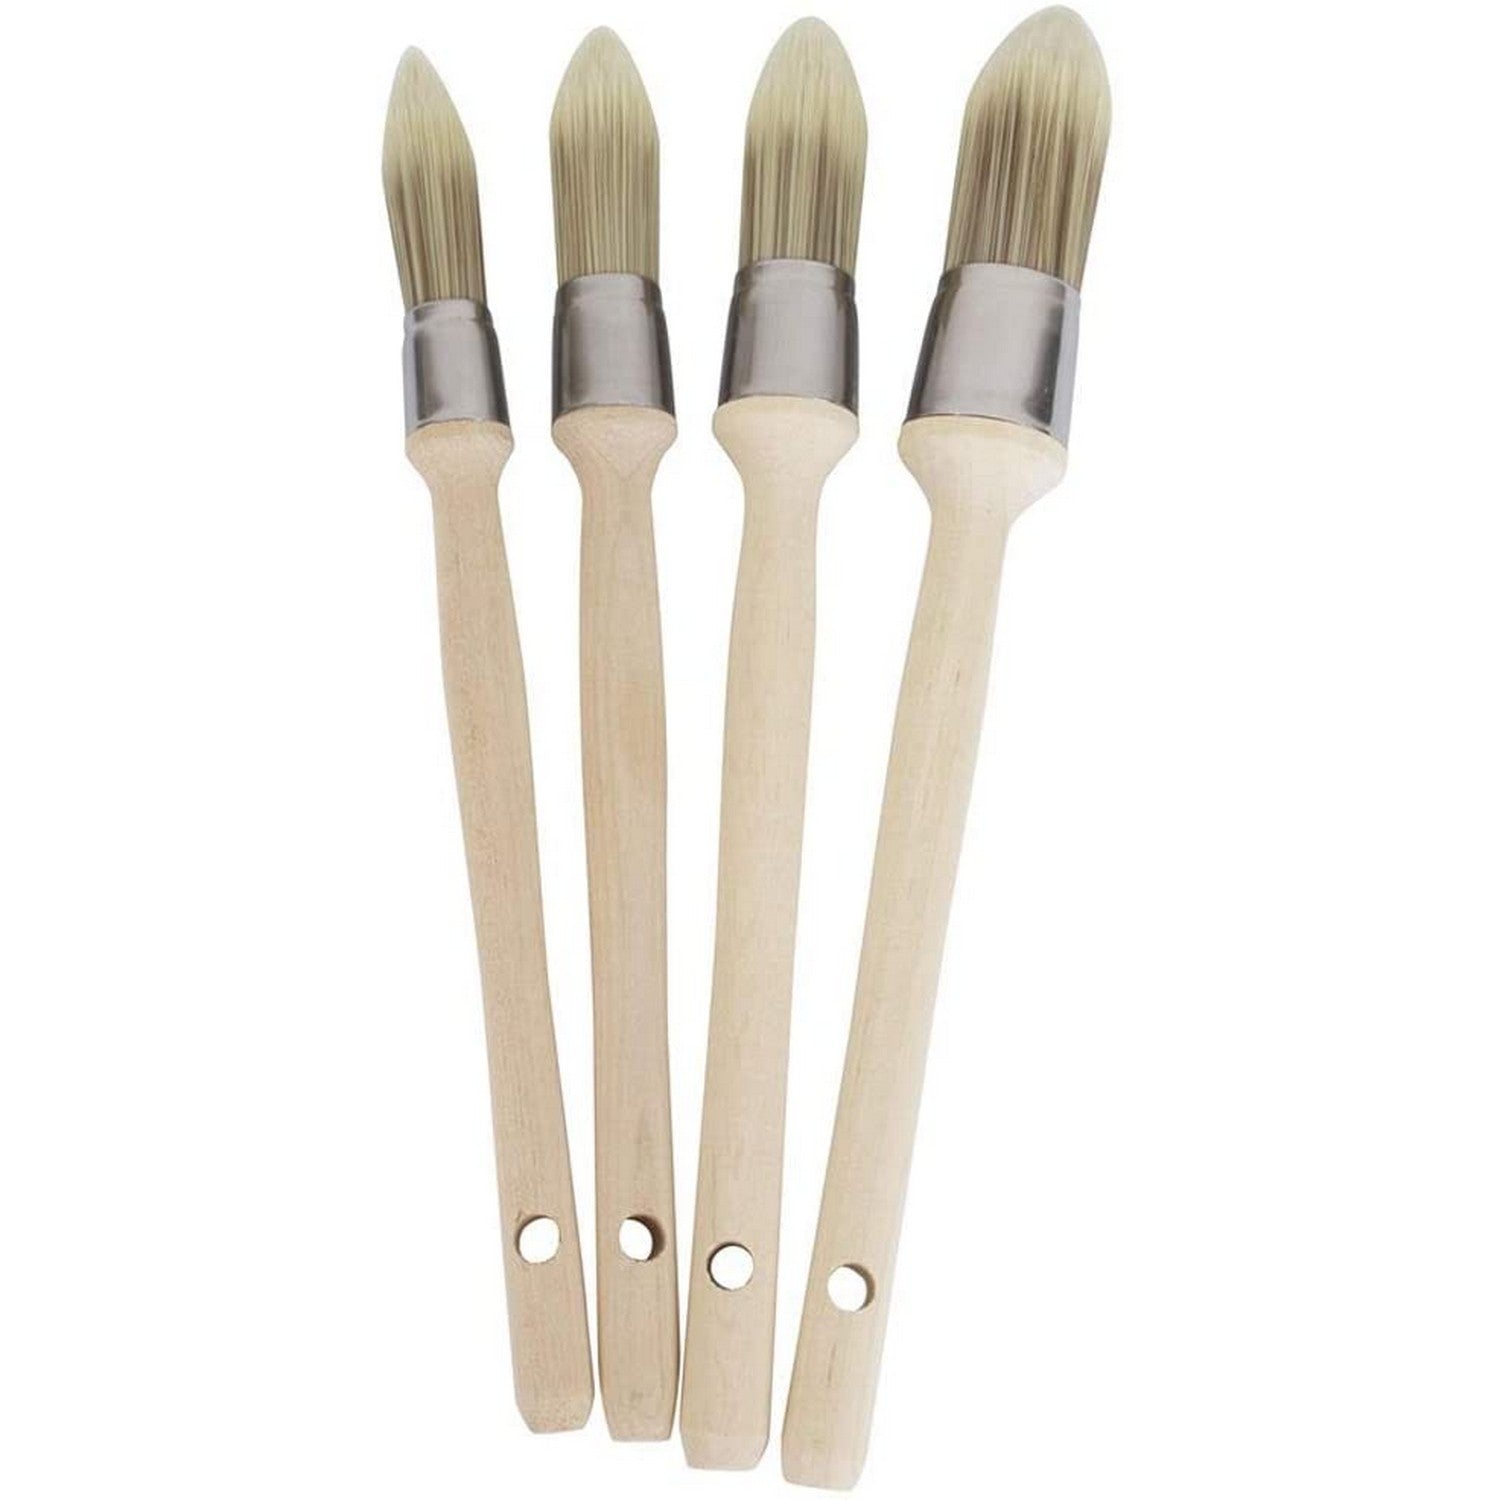 Set of 4 Pointed Tapered Sash Brush Set Synthetic Filaments